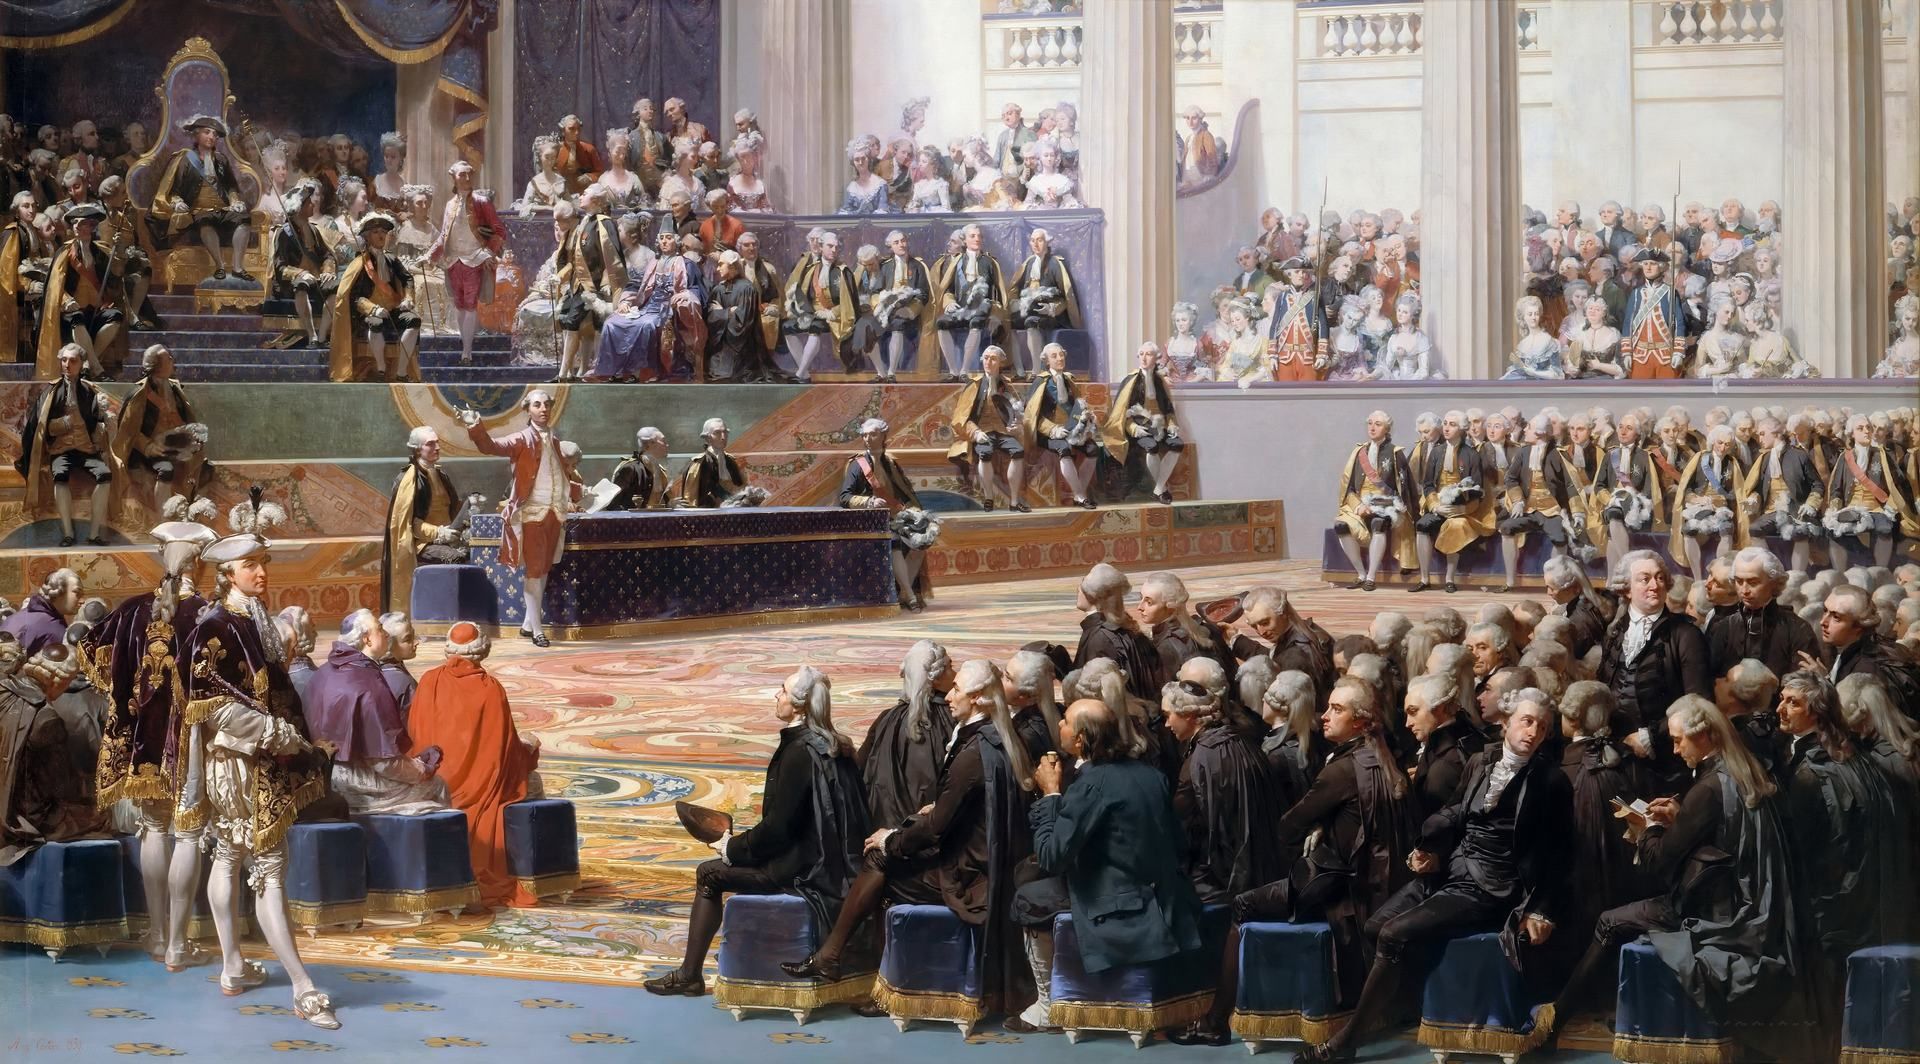 This is a painting by Auguste Couder that meticulously captures the commencement of the Estates-General in Versailles at the dawn of the French Revolution. The grand hall is filled with light, emphasizing the detailed architecture and the opulent decoration of the era. Multiple groups are depicted: the clergy in white robes, the nobility in opulent attire, and the commoners, appearing more modestly dressed. The focal point is the center, where a speaker stands before the assembly, addressing the gathered estates. King Louis XVI and Queen Marie Antoinette are portrayed seated in a balcony above, surrounded by courtiers and dignitaries. The assembly members, arrayed in benches according to their respective estates, are shown in various states of attention and discussion, reflecting the social and political tensions of the time. The atmosphere is one of anticipation and gravity, as this meeting would set the stage for monumental changes in French society.